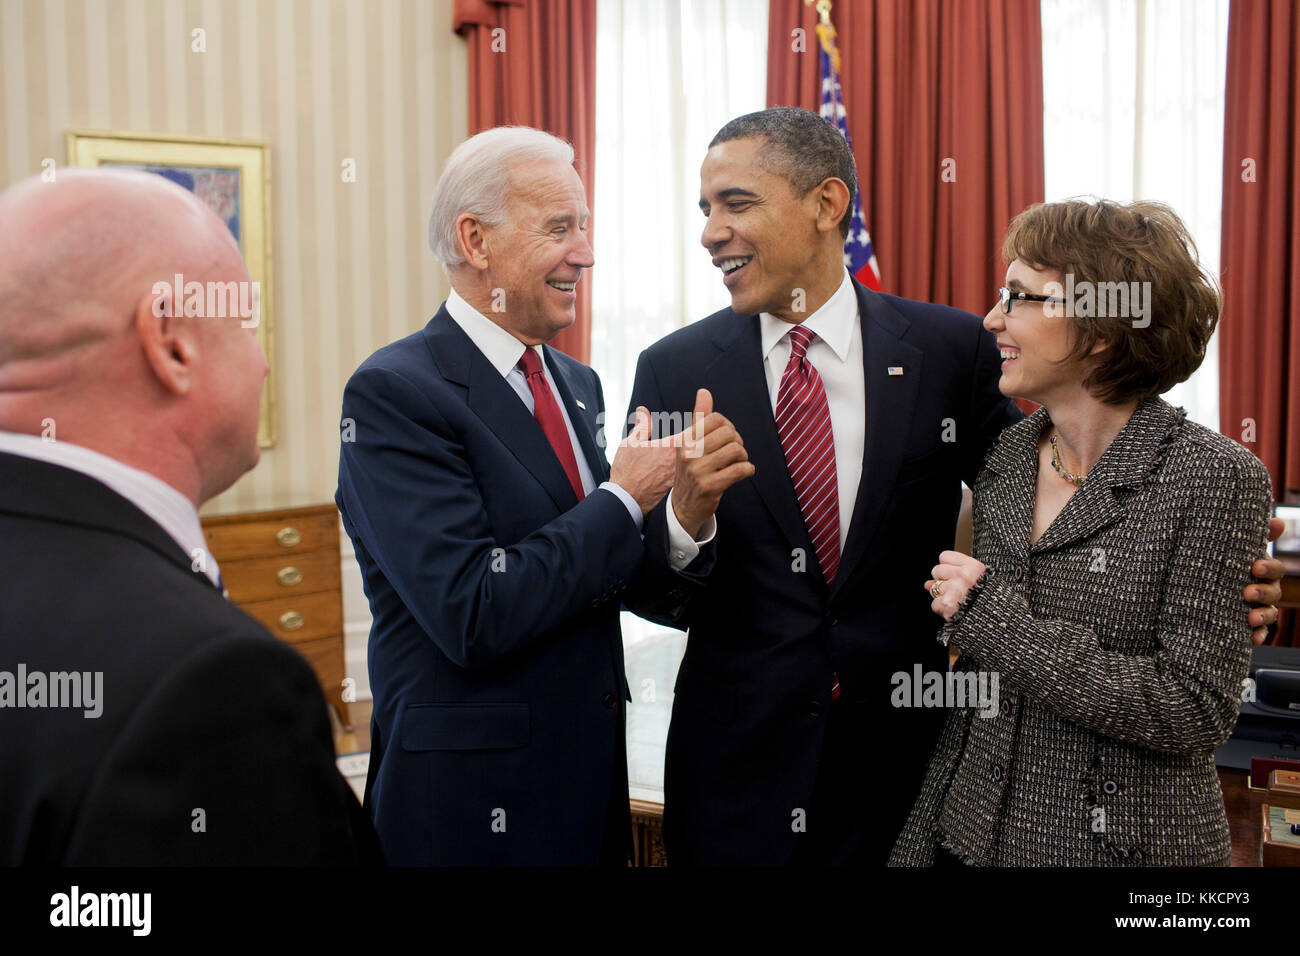 President Barack Obama and Vice President Joe Biden talk with former Representative Gabrielle Giffords and her husband, Mark Kelly, after the President signed H.R. 3801, the Ultralight Aircraft Smuggling Prevention Act of 2012, in the Oval Office, Feb. 10, 2012. The bill was the last piece of legislation that Giffords sponsored and voted on in the U.S. House of Representatives. Stock Photo